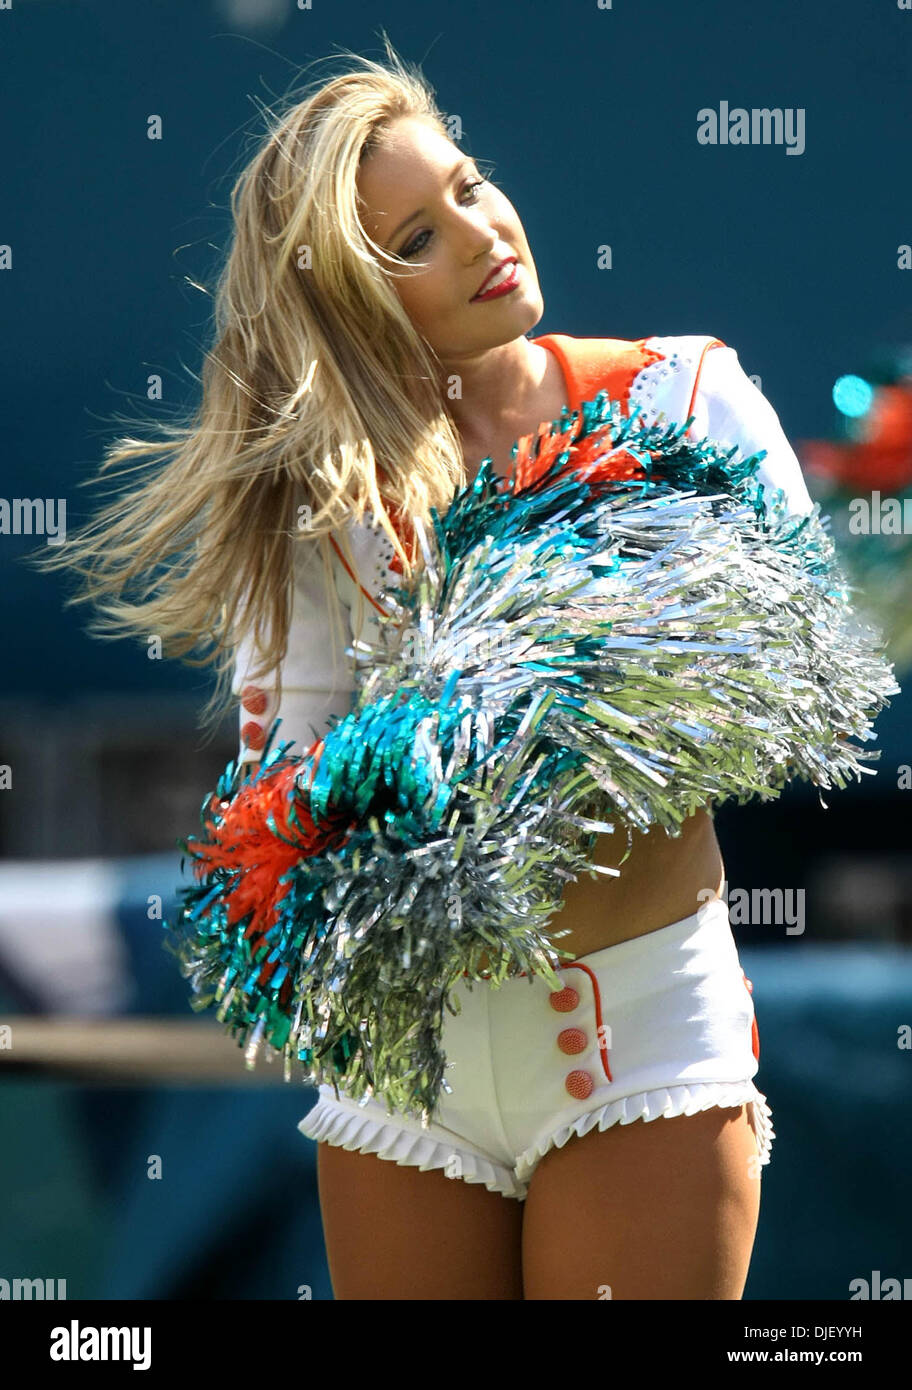 Miami Dolphins Cheerleaders 2007 Poster - The Time Factory – Sports Poster  Warehouse